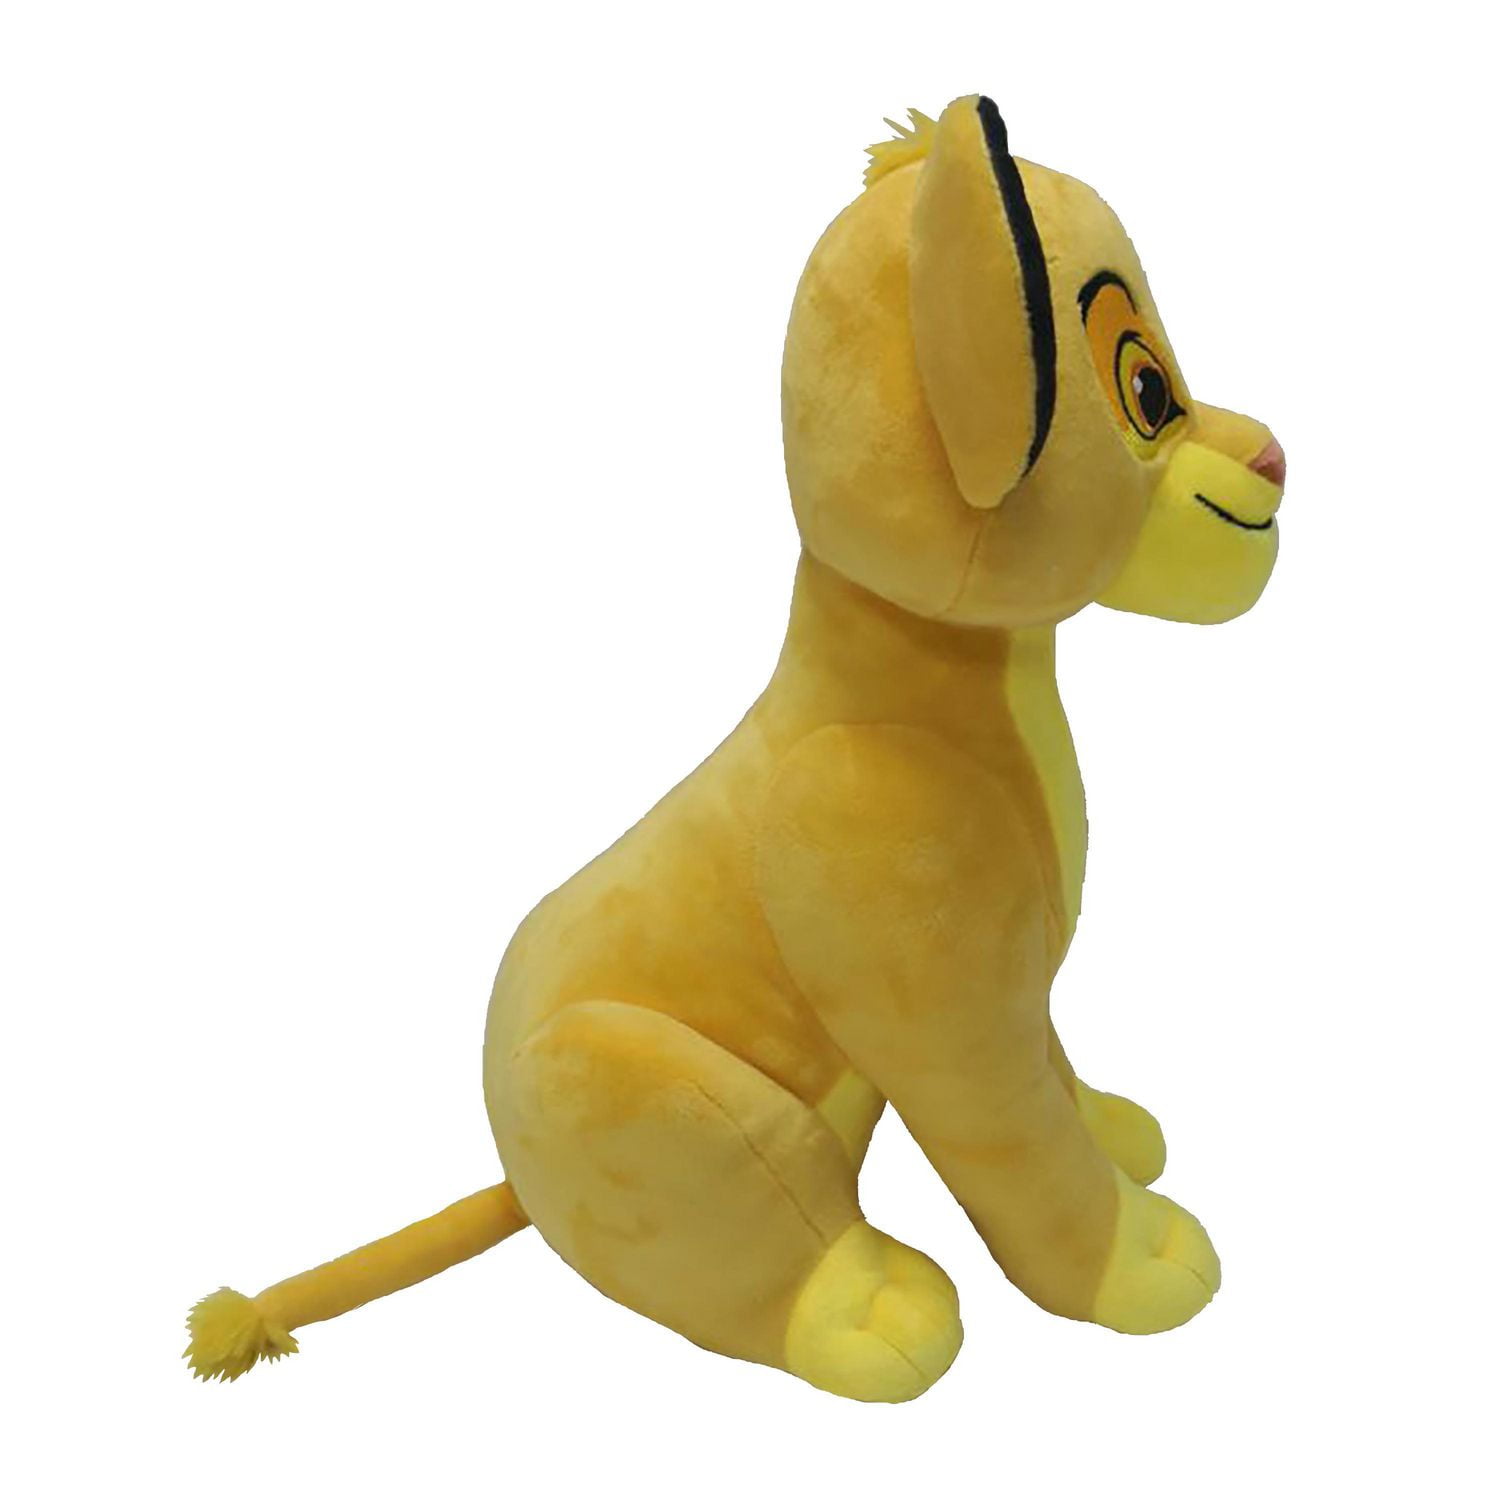 The Lion King the Broadway Musical - Small Simba Plush Doll - The